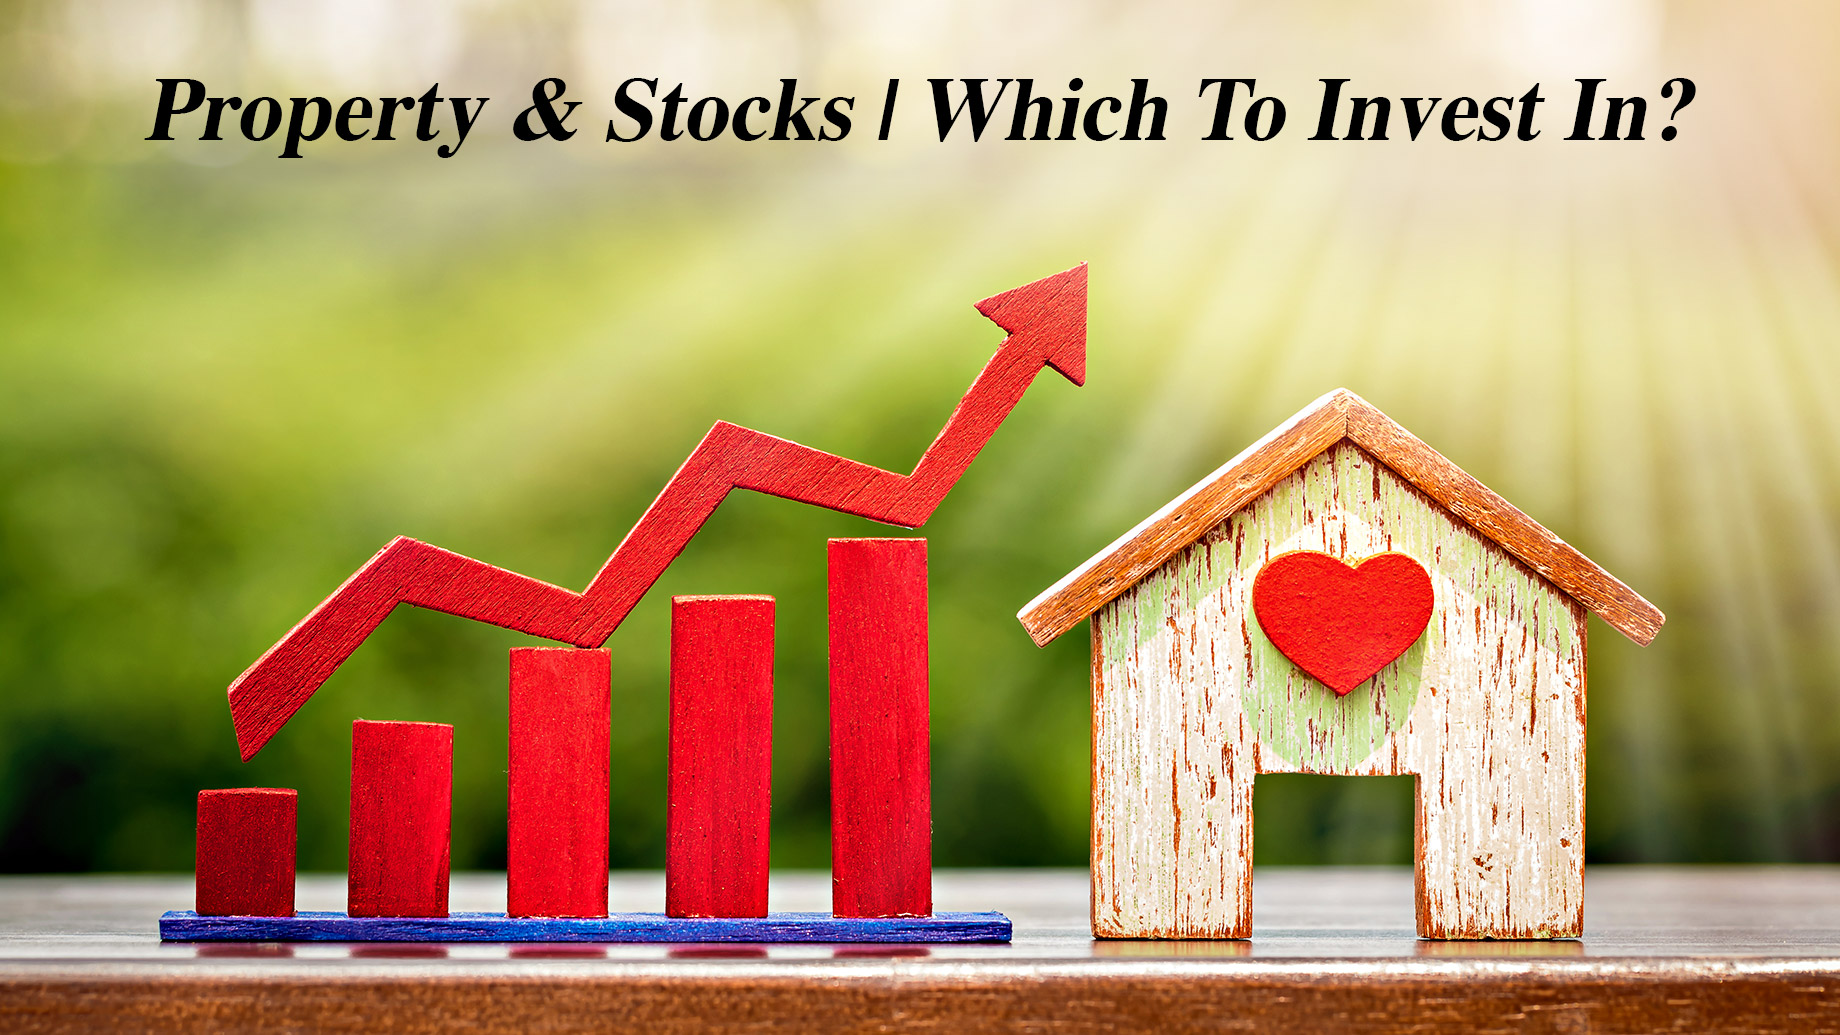 Property & Stocks - Which To Invest In?